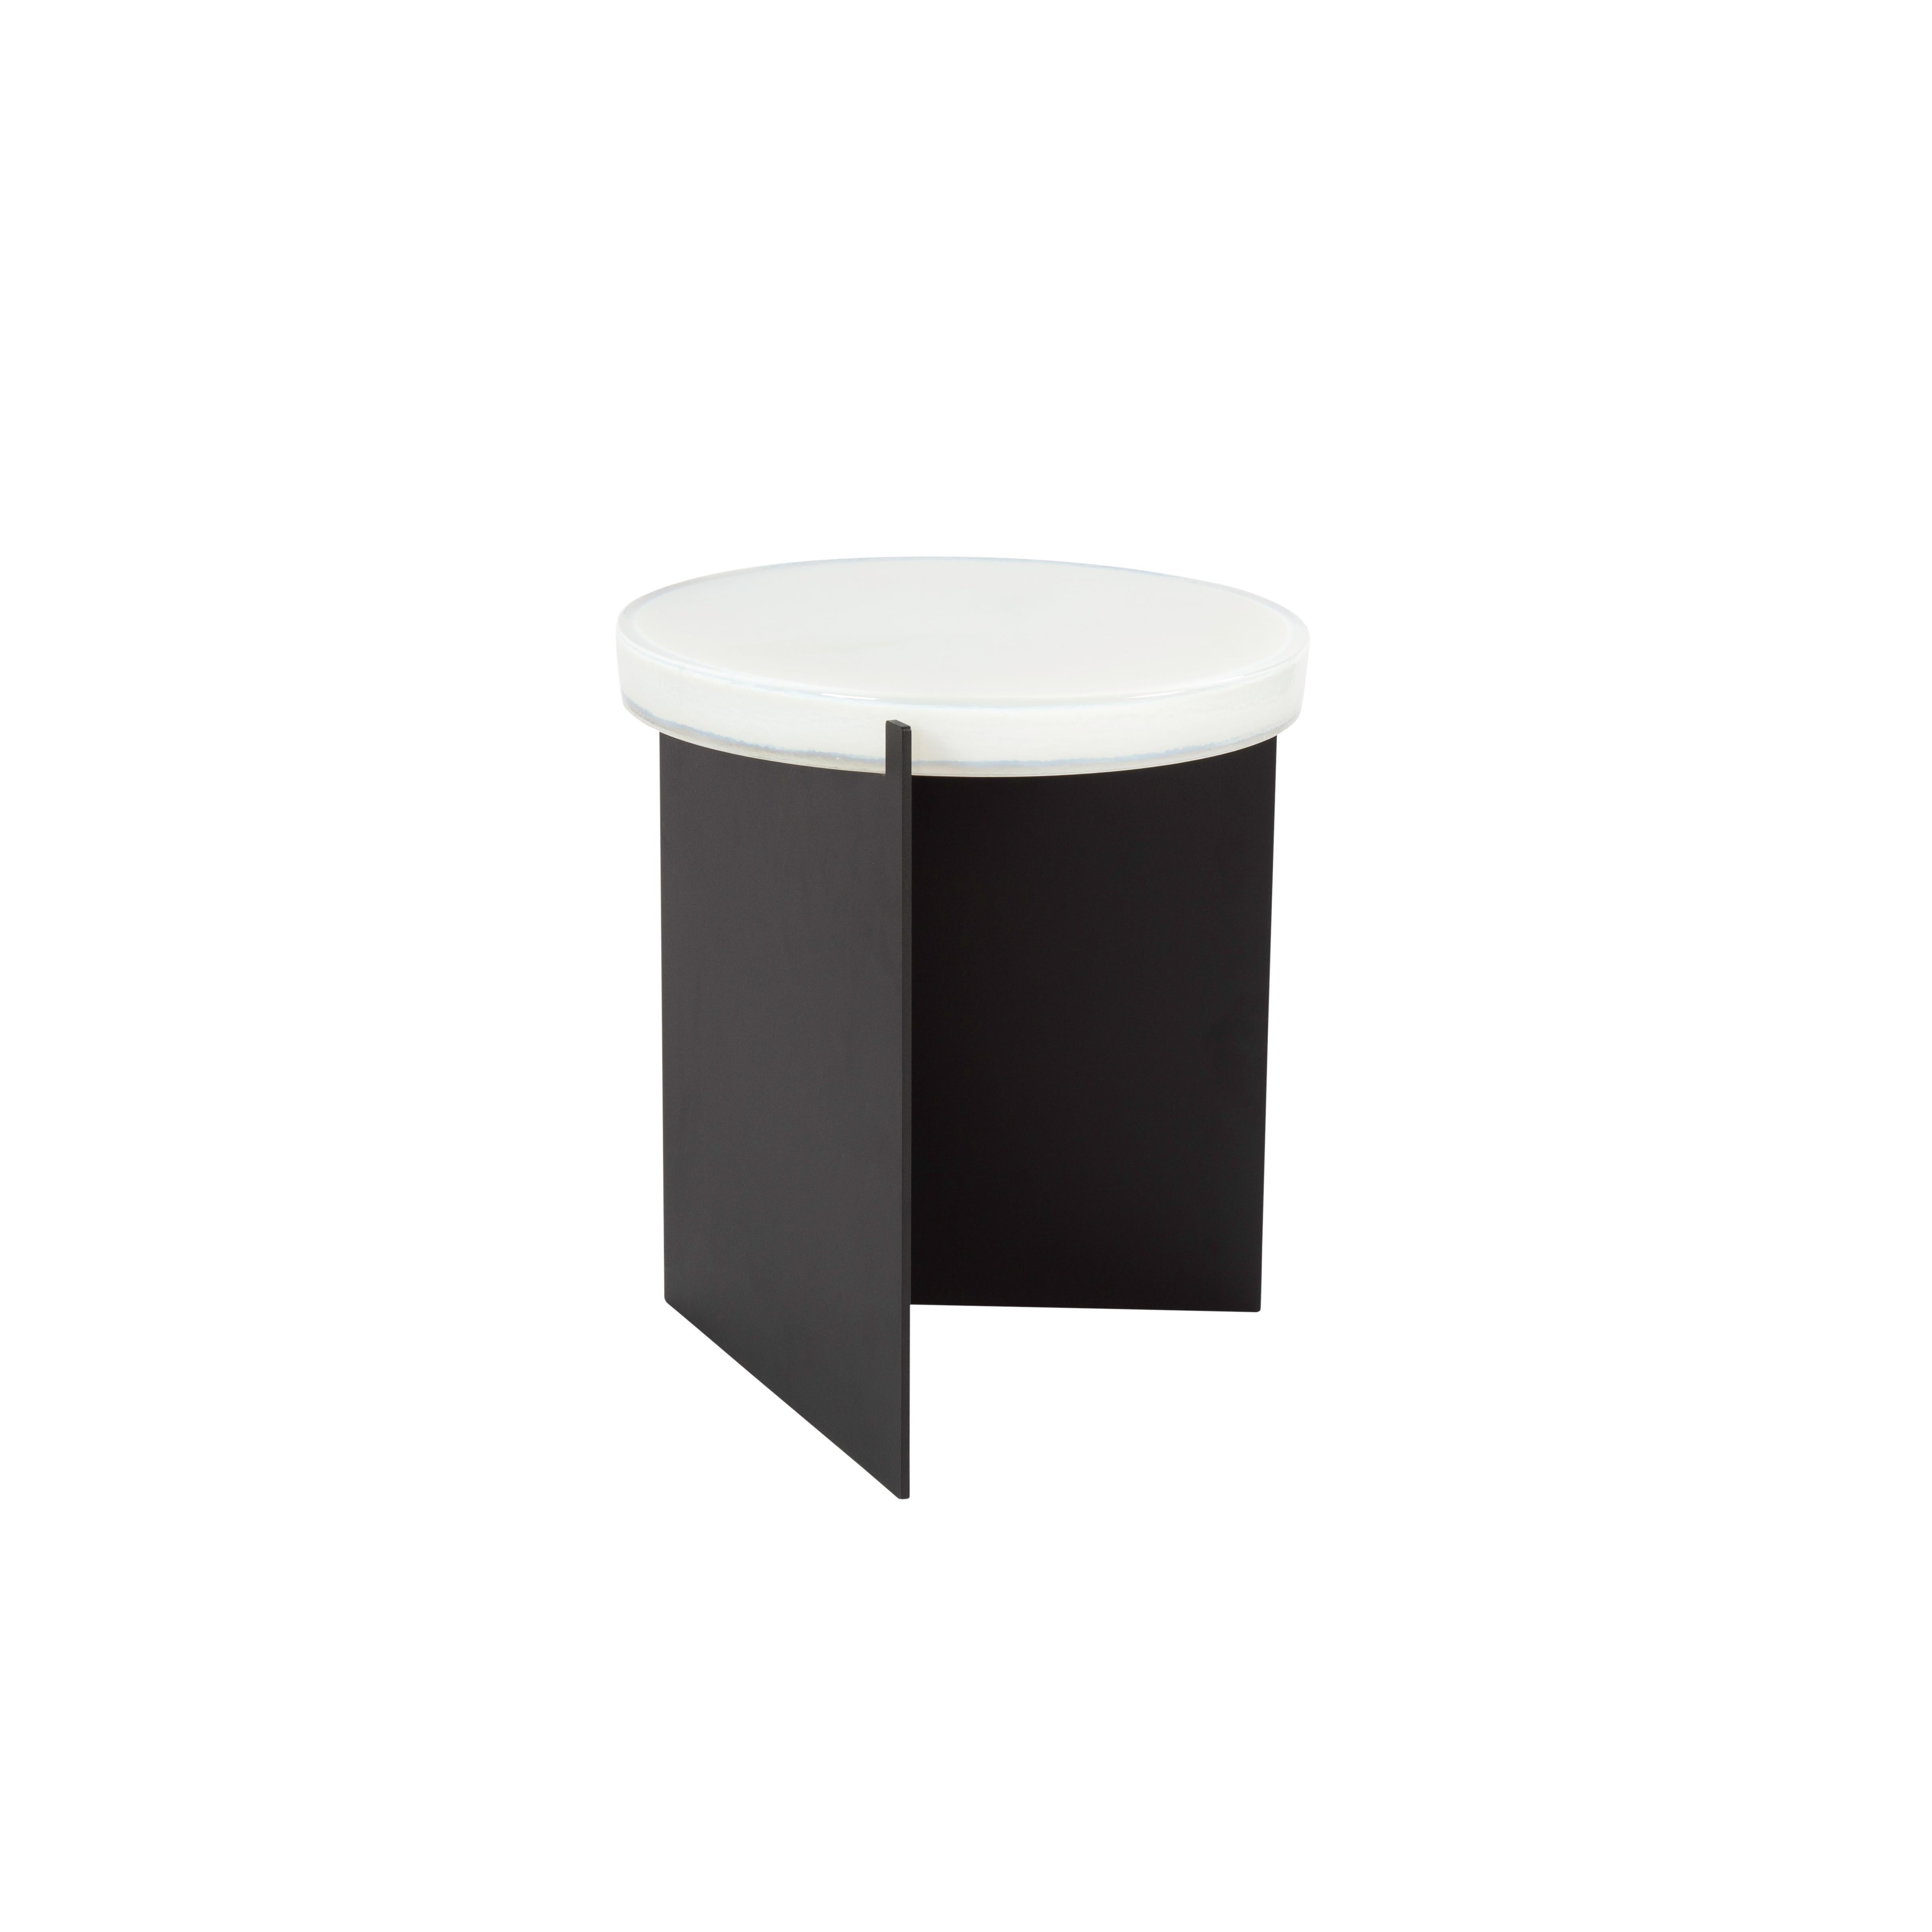 Alwa one white black side table by Pulpo.
Dimensions: D38 x H44 cm.
Materials: Casted glass; powder coated steel. 

Also available in different finishes. 

Normally, glass is regarded as being lightweight with sharp edges. In contrast, Sebastian